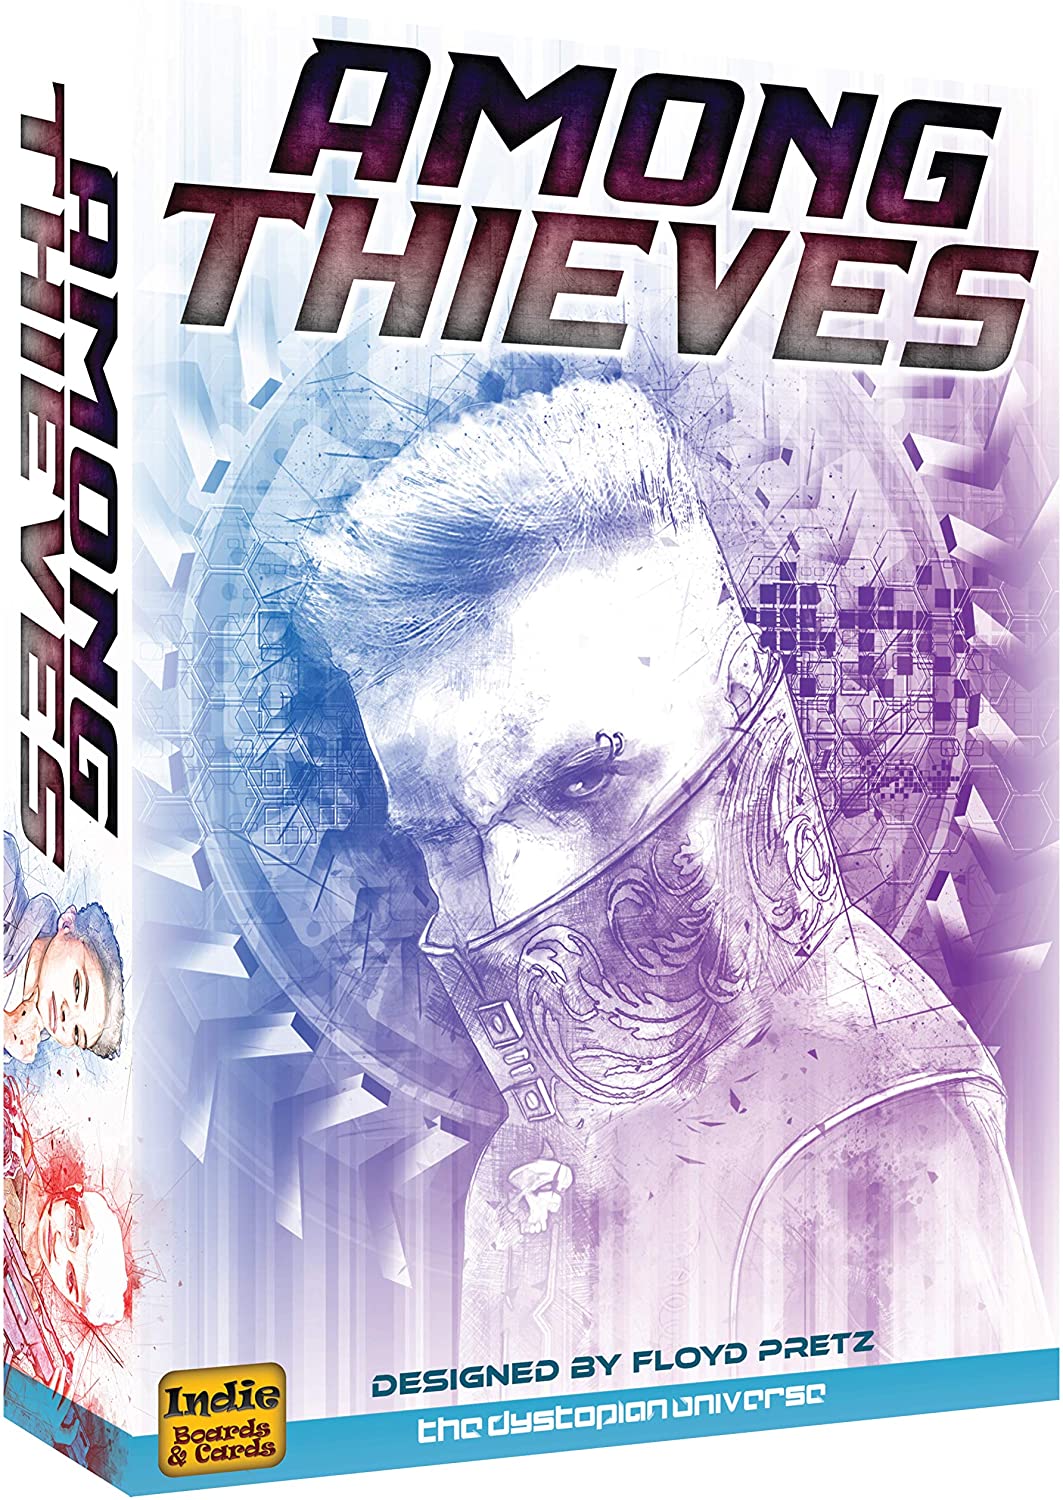 (BSG Certified USED) Among Thieves